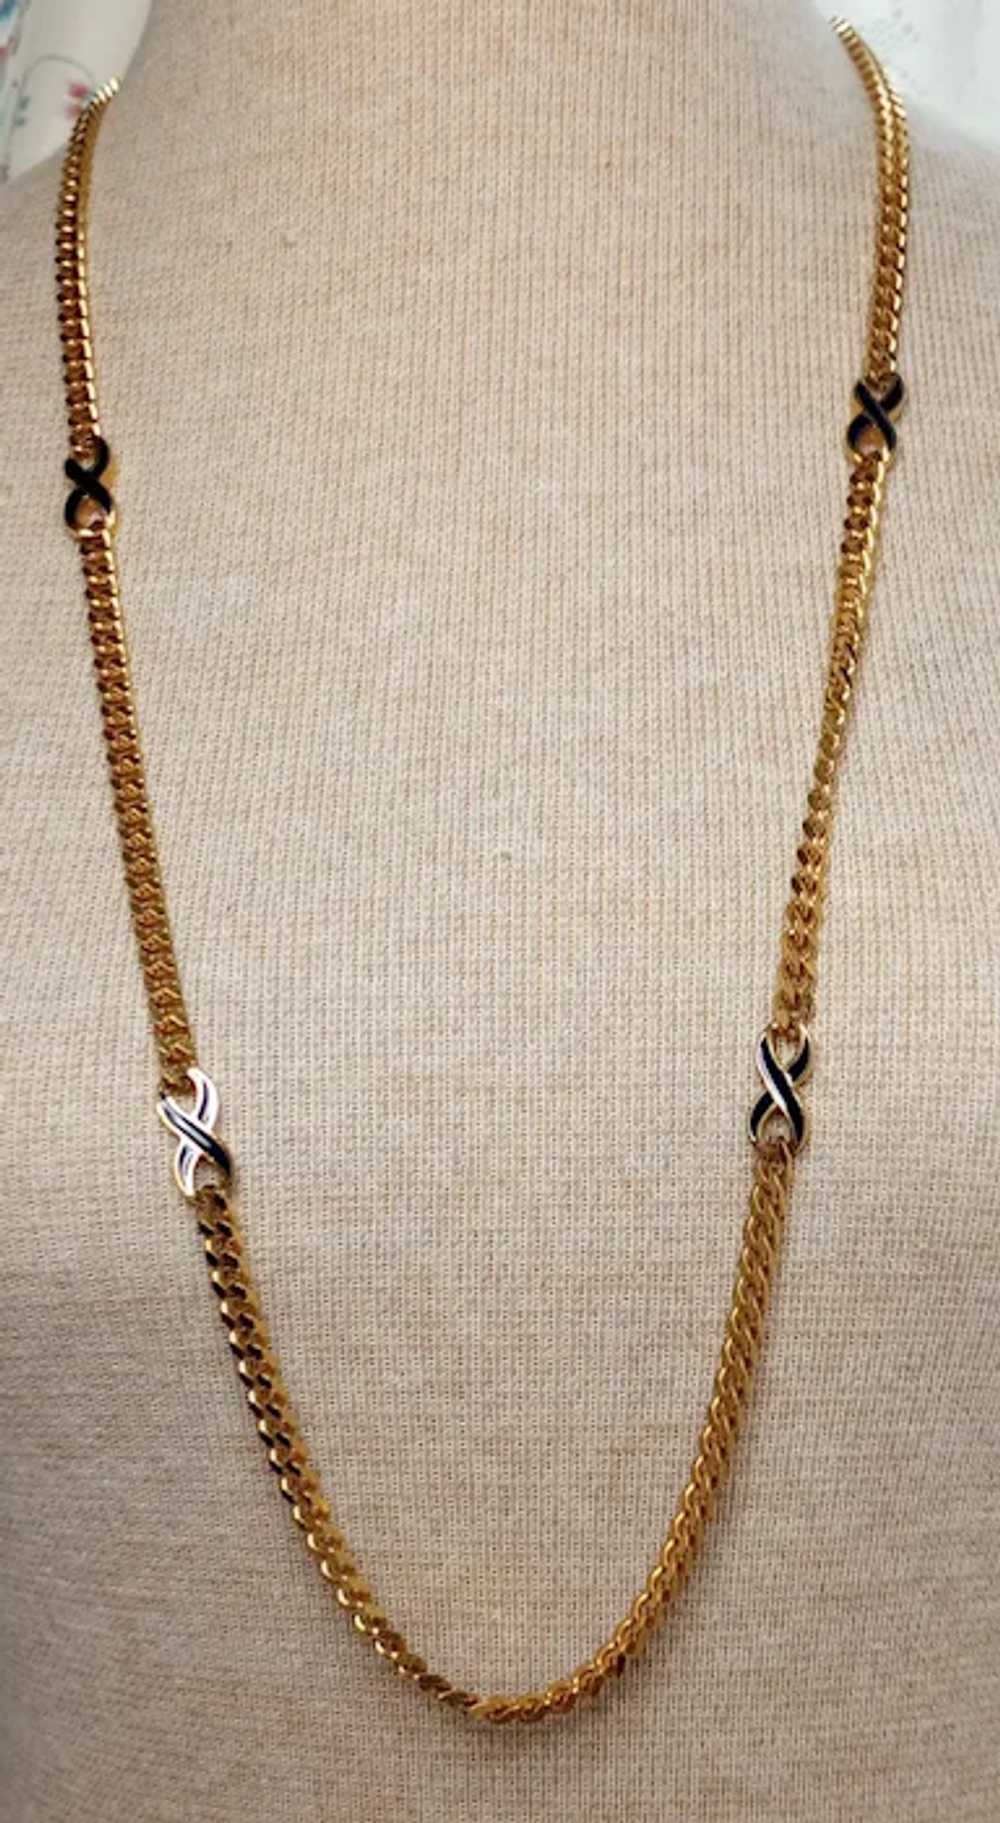 Vintage Givenchy Classic Gold Chain Necklace, Min… - image 2